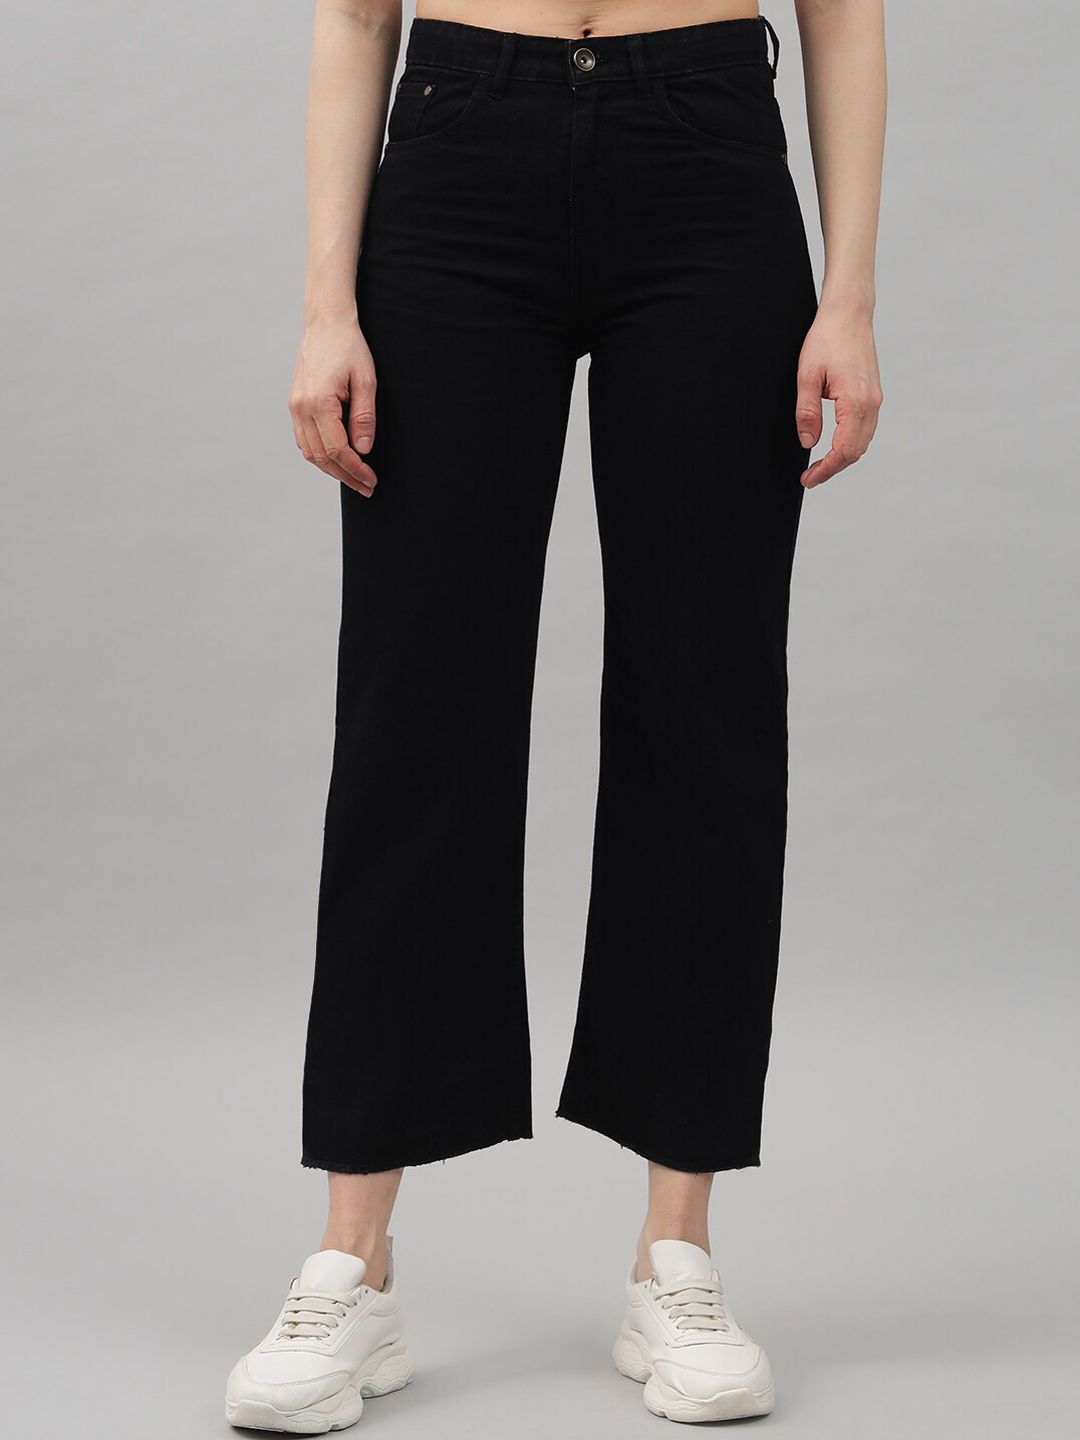 Q-rious Women Black Flared High-Rise Stretchable Jeans Price in India